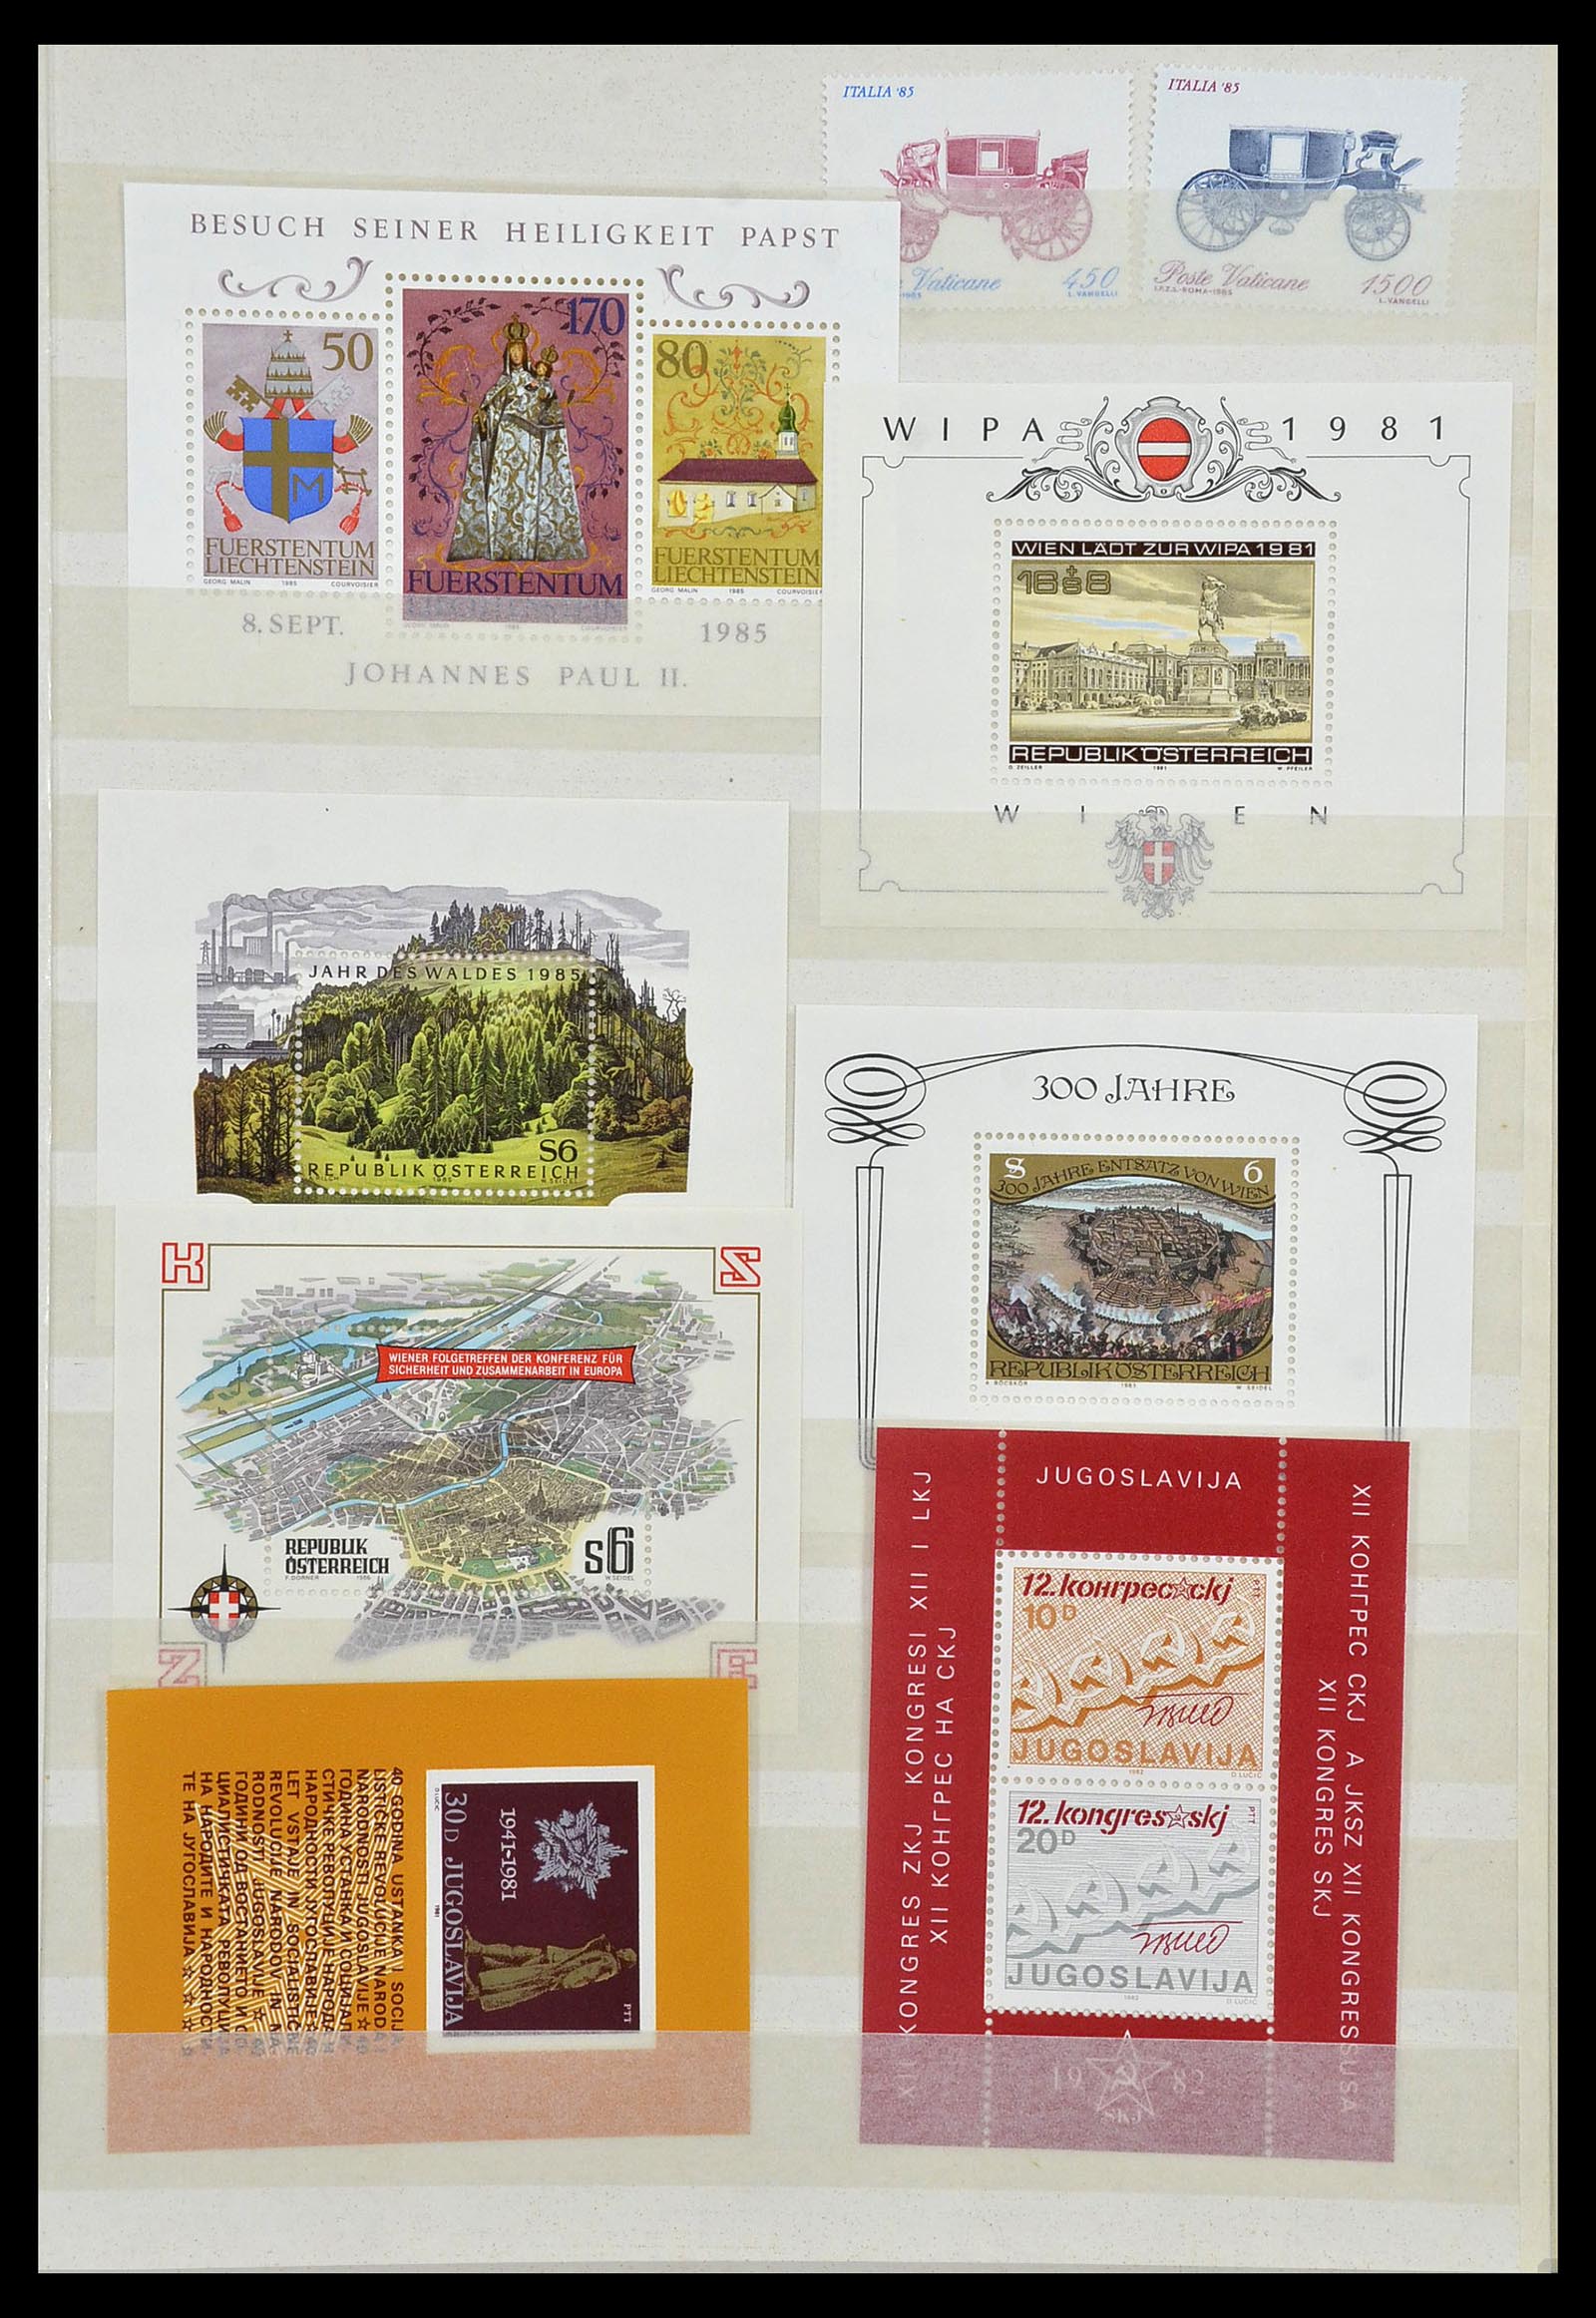 34045 033 - Stamp collection 34045 Western Europe souvenir sheets 1973-1986.